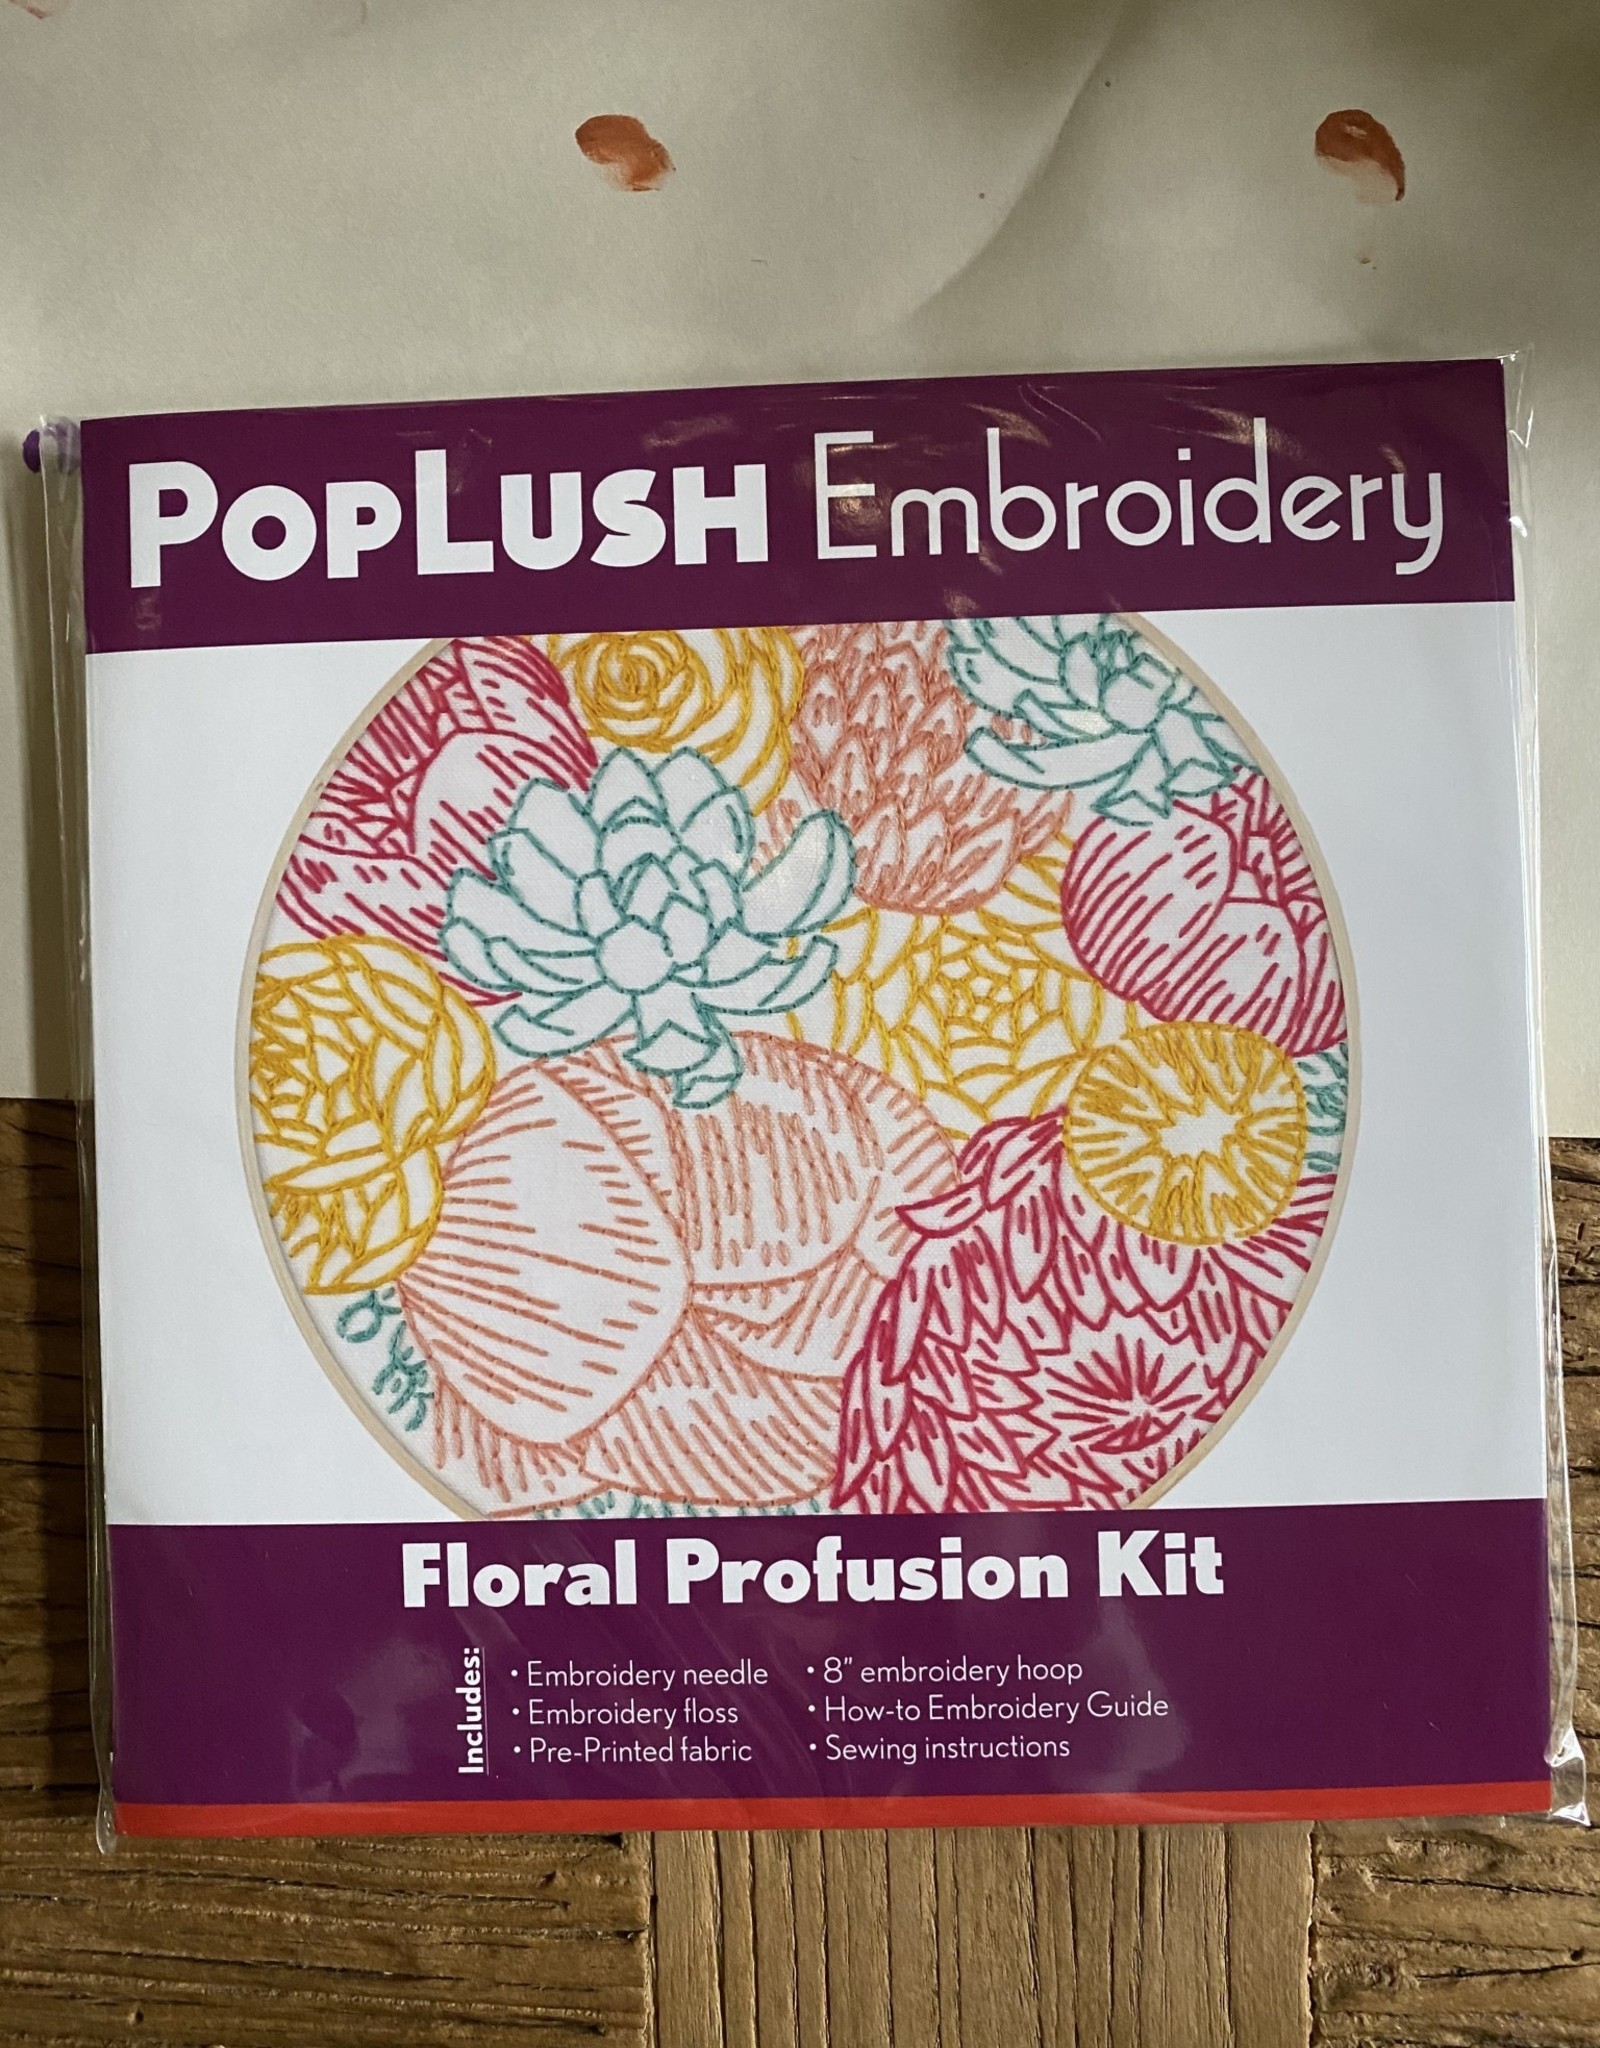 PopLush Embroidery Floral Profusion Embroidery Kit